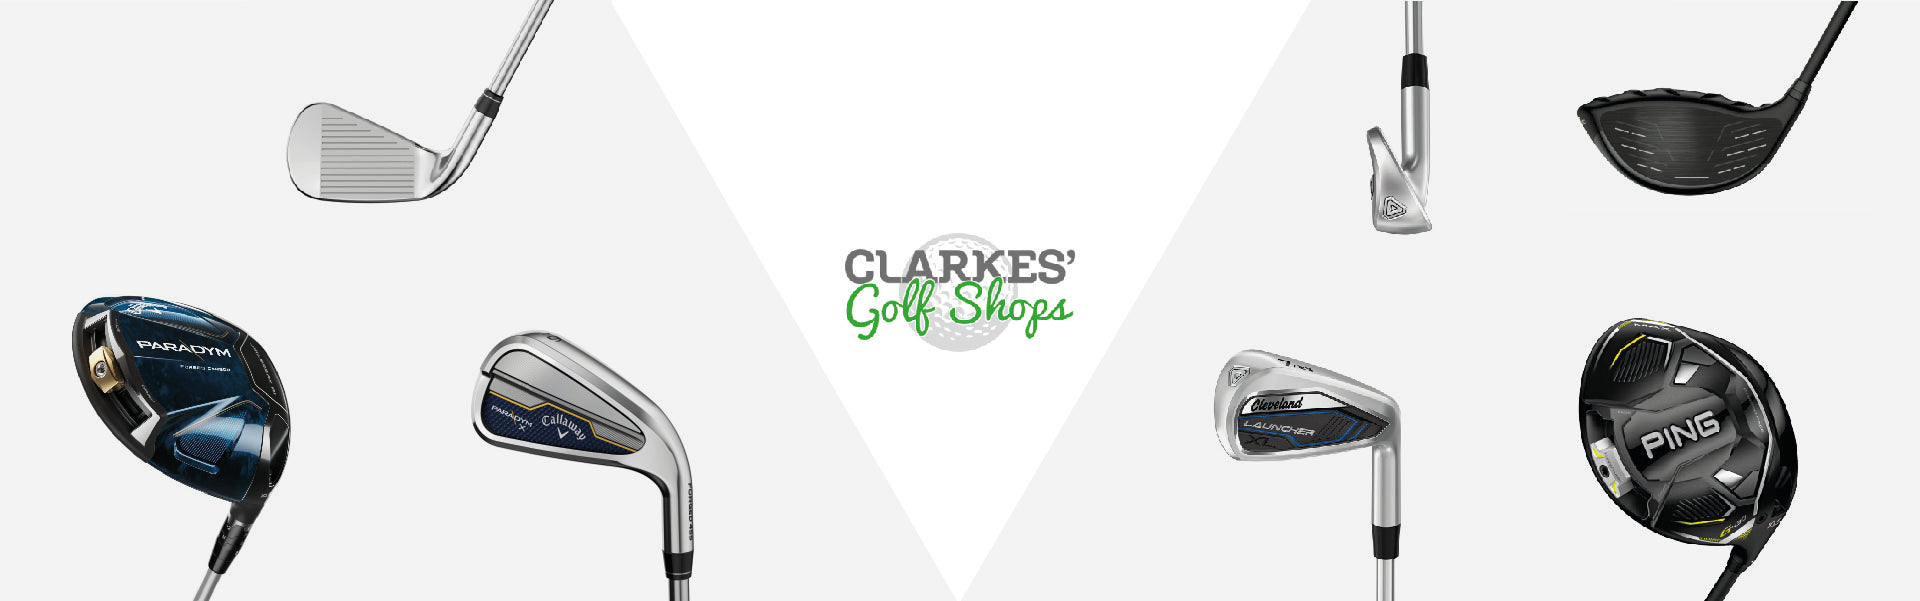 Top 5 Common Golf Mistakes You Can Easily Fix - Clarkes Golf